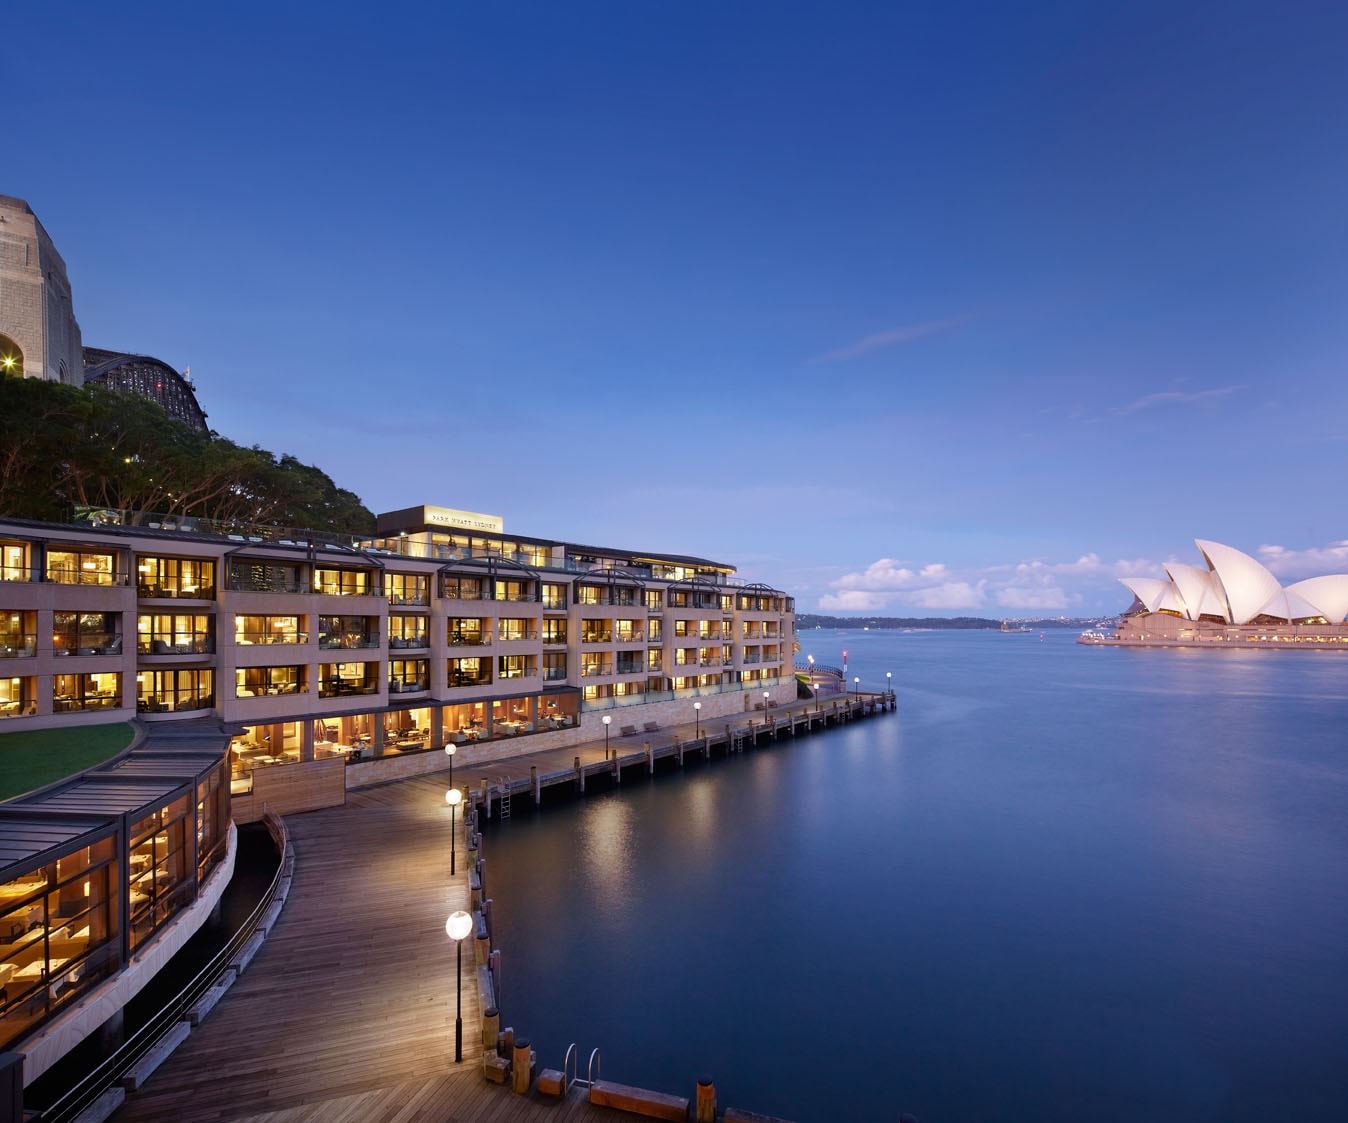 Park Hyatt at twilight at Sydney Harbour with Opera House views